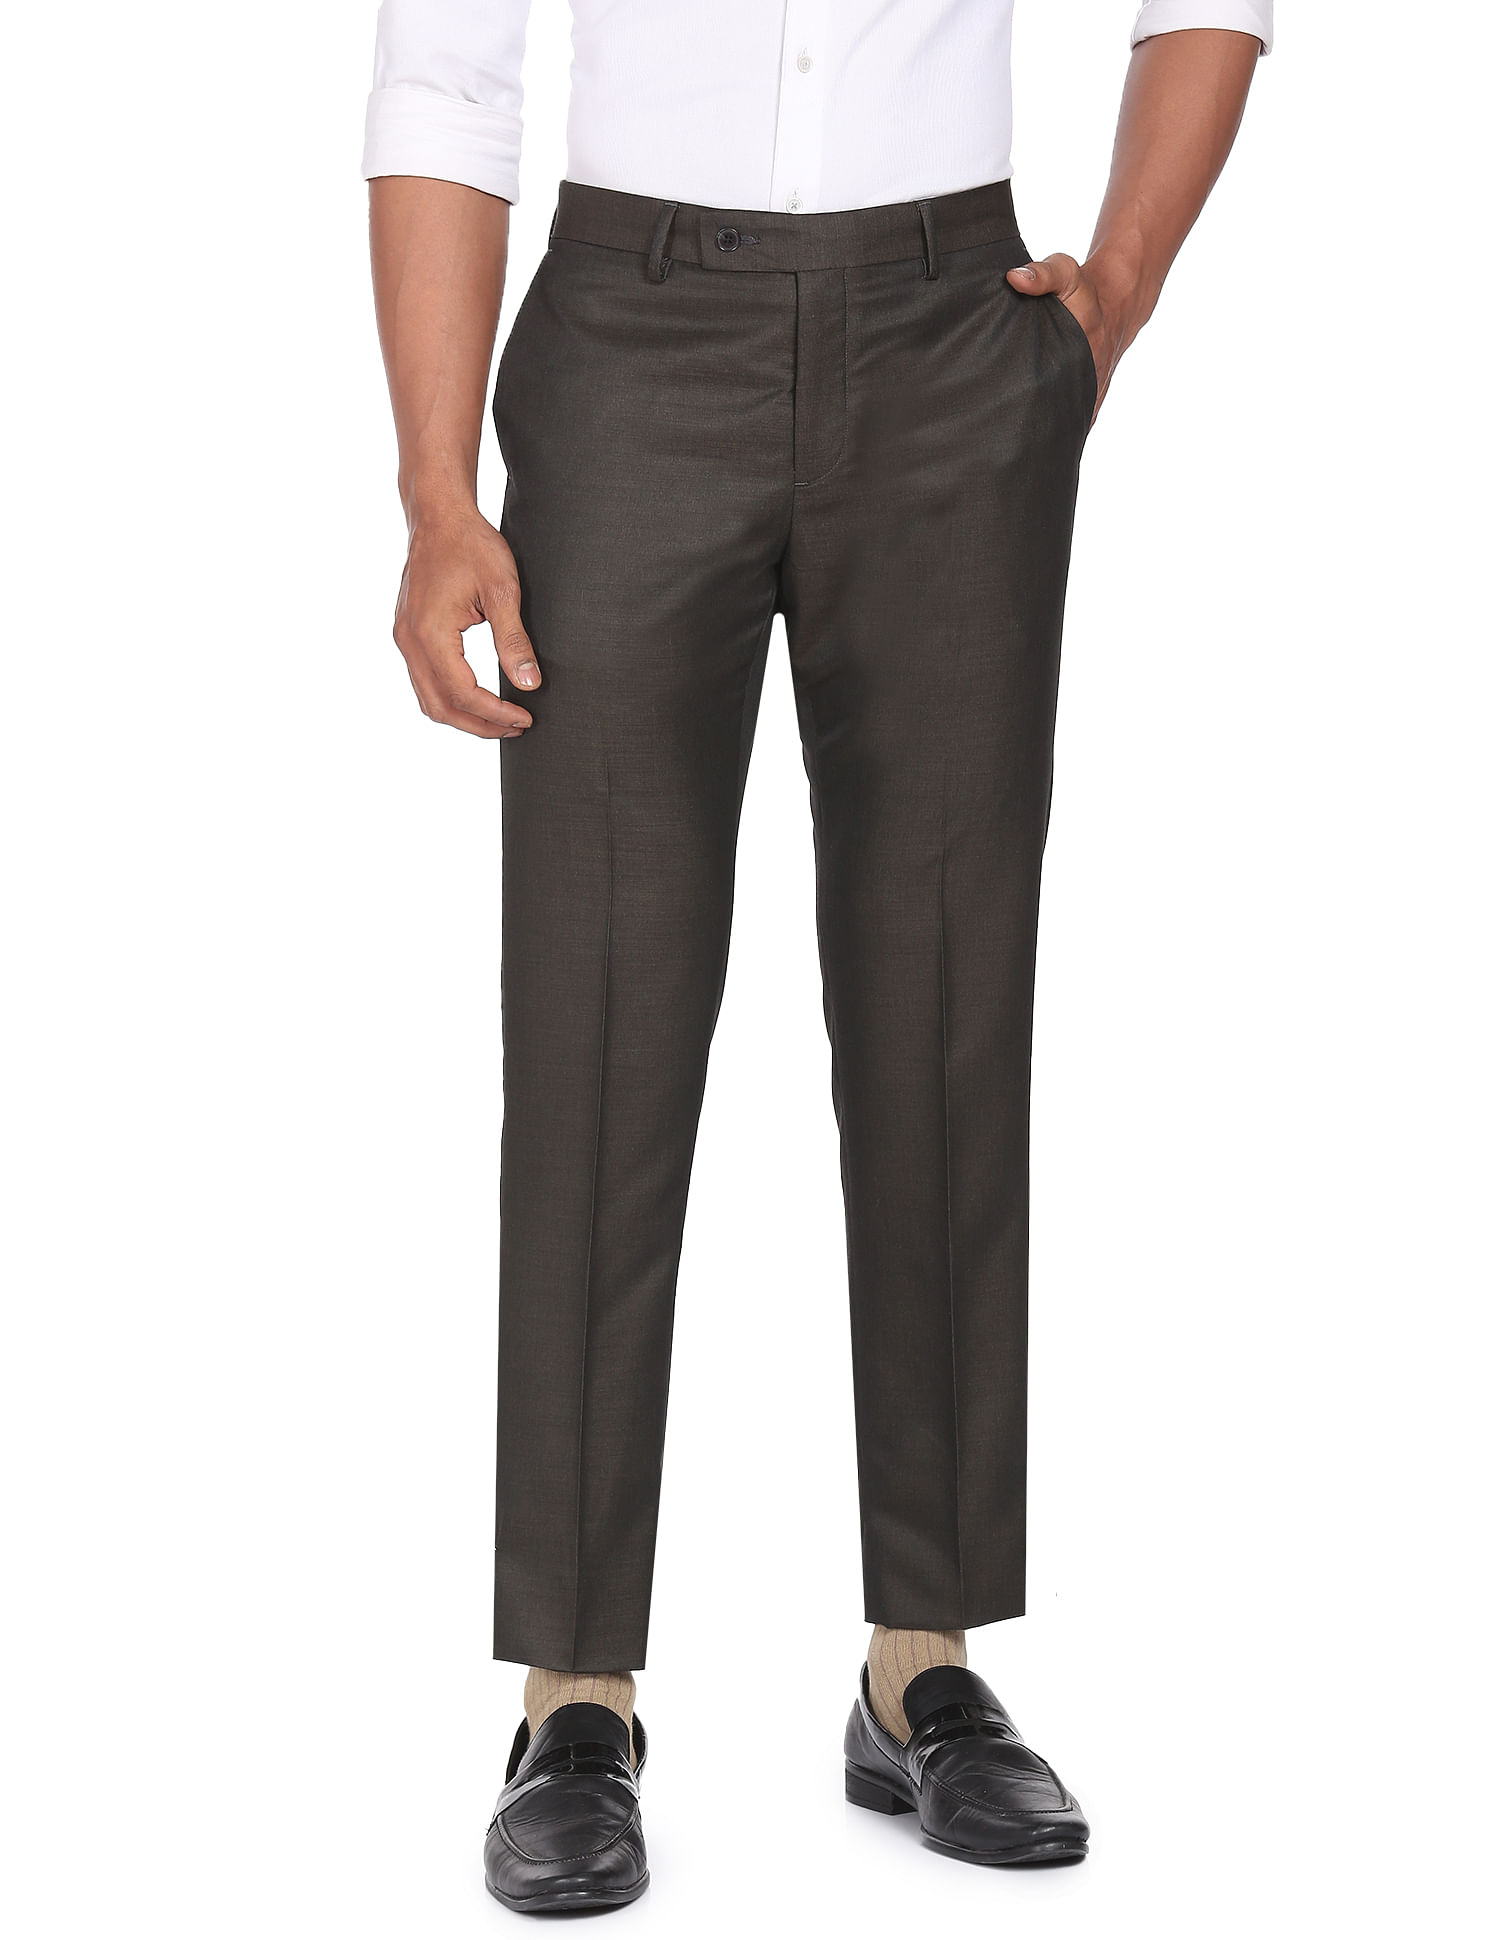 Shop Formal Bottoms  Formal Trousers for Men Online at MS India